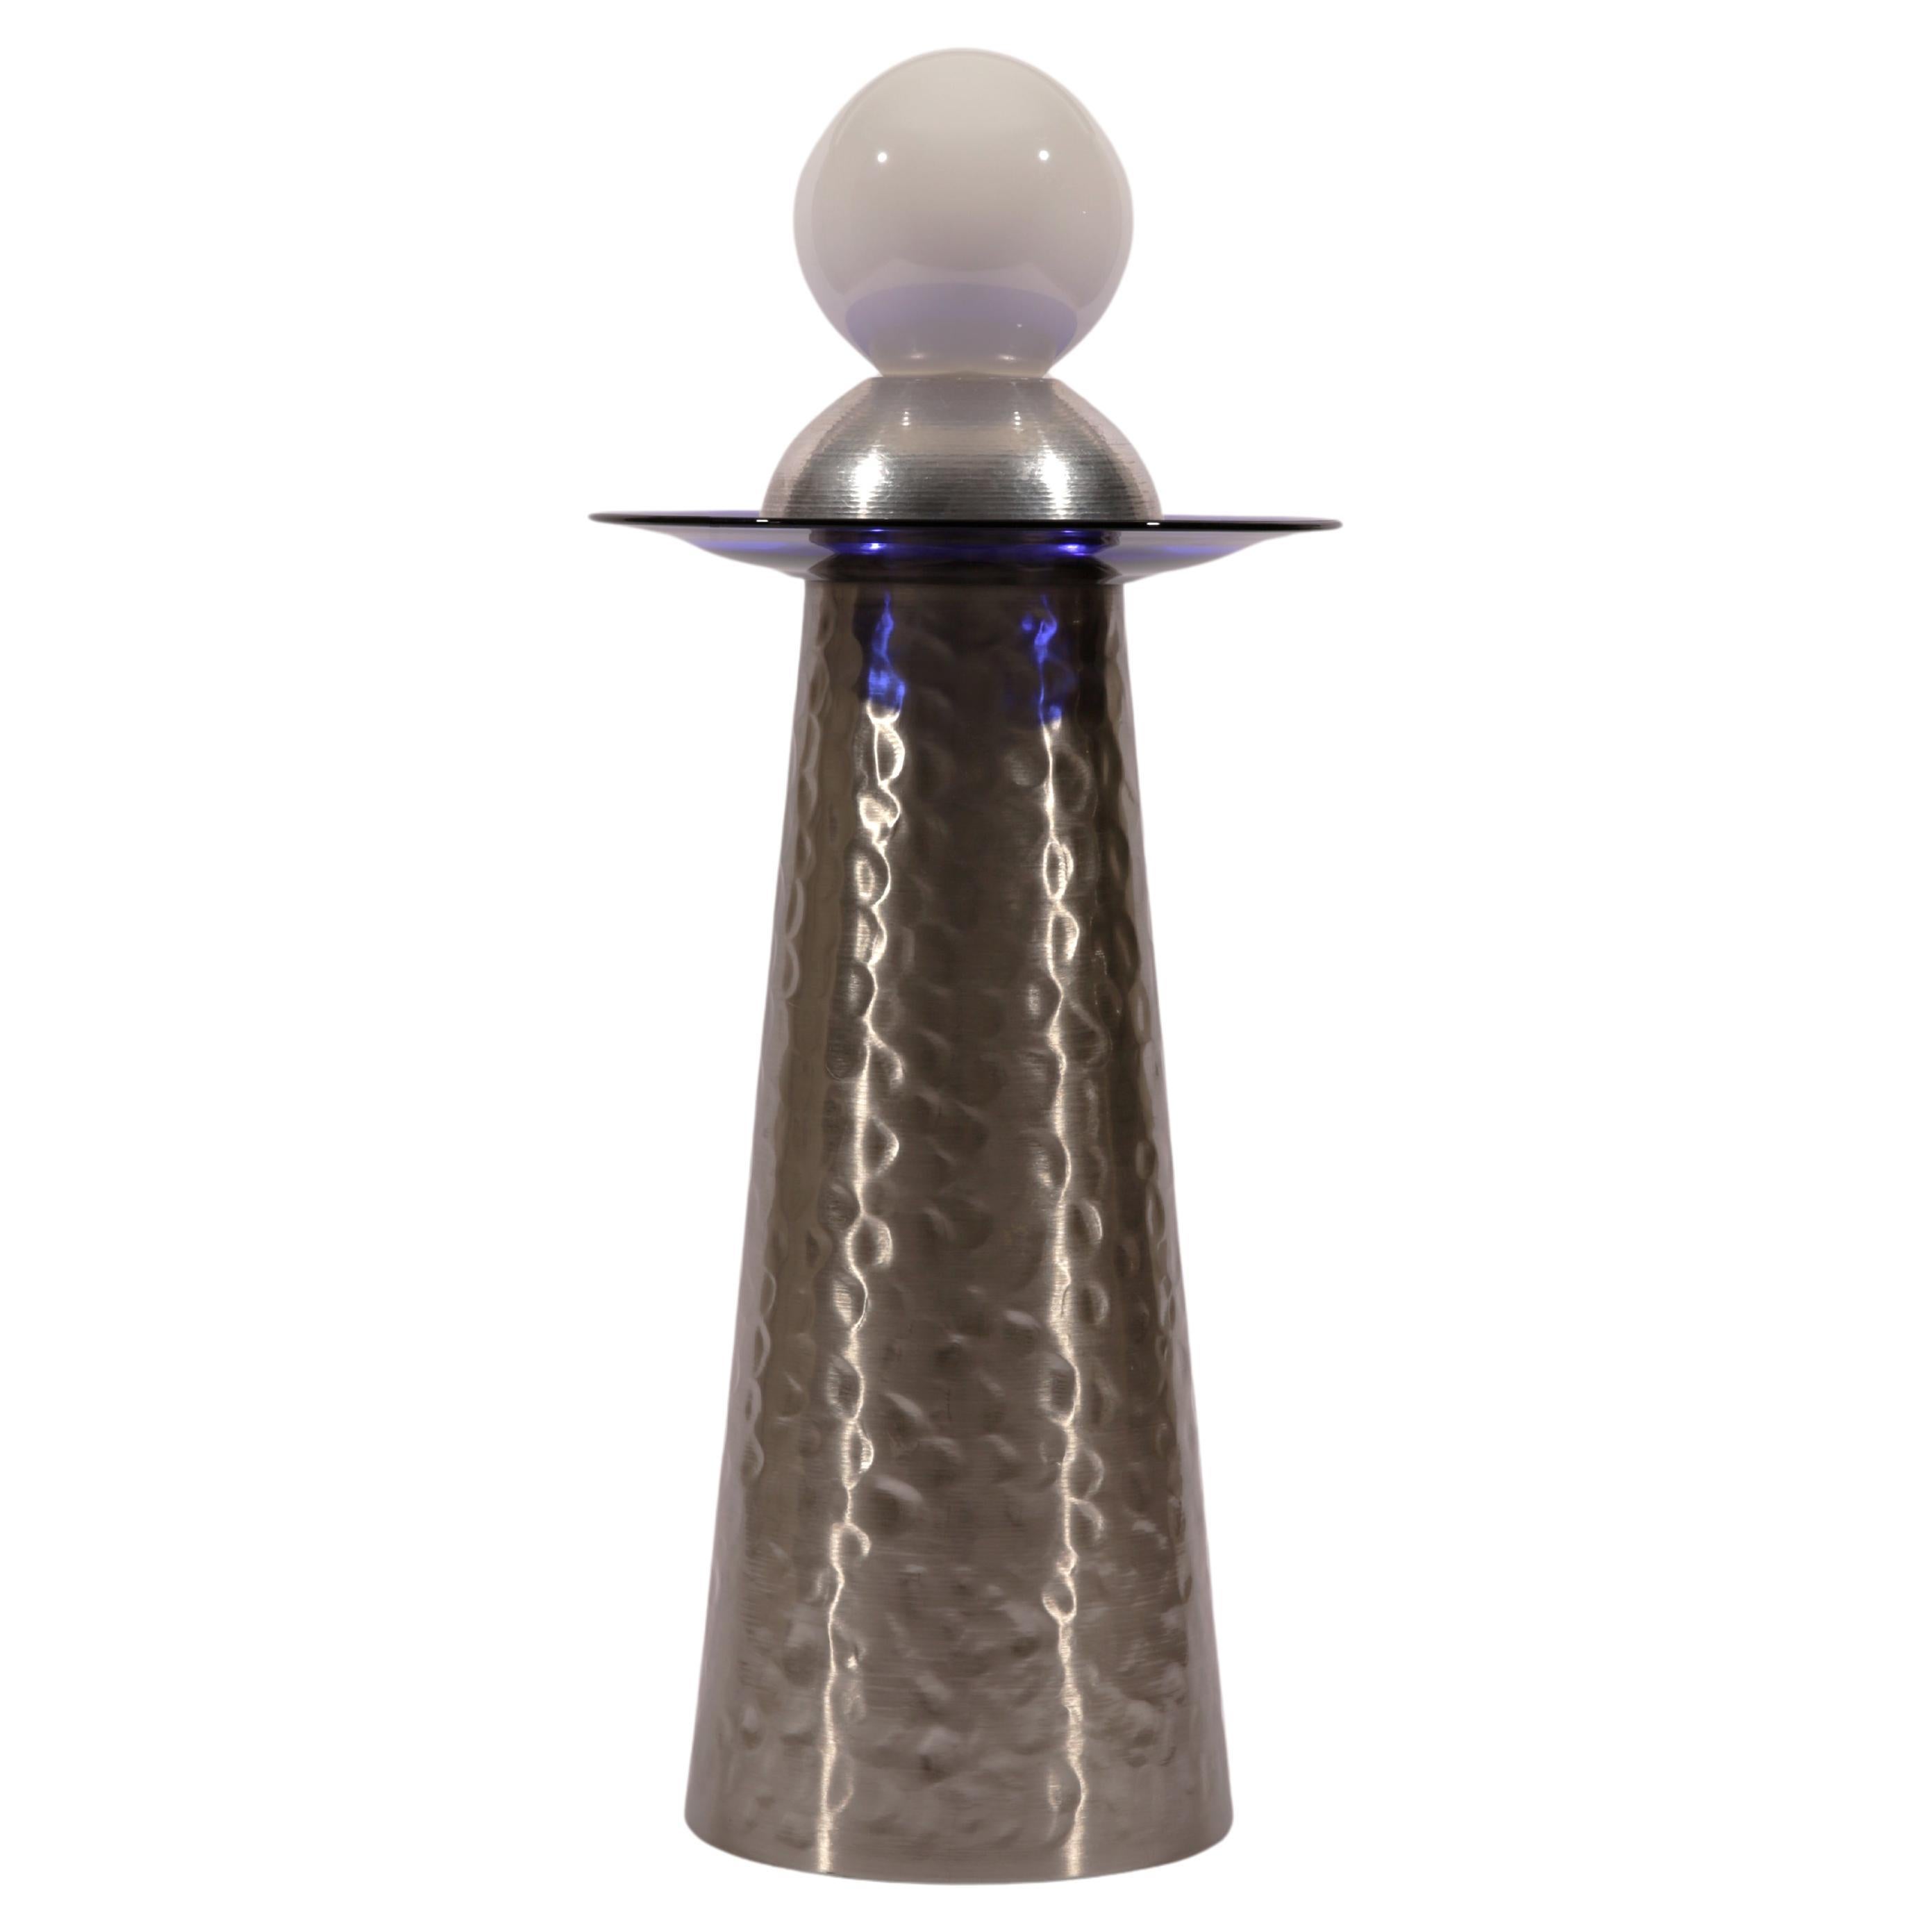 Space Age Aluminum Blue Glass Contemporary Table Lamp by Nusprodukt